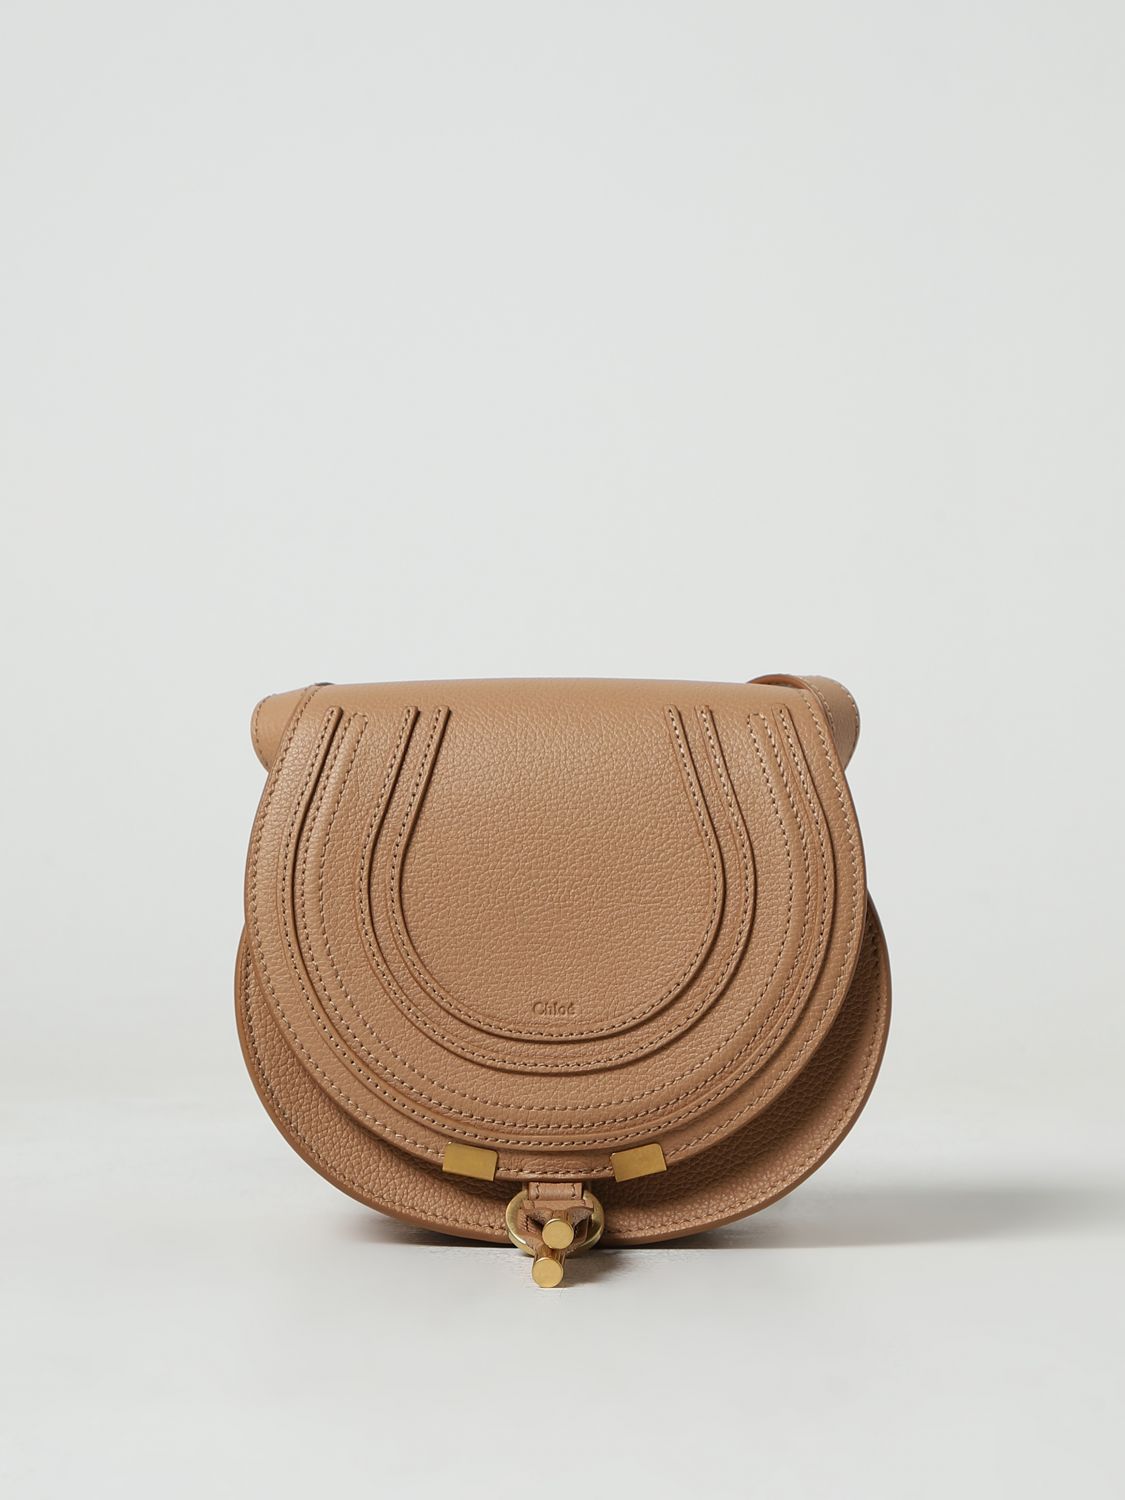 Chloé Marcie  Bag In Grained Leather In Camel